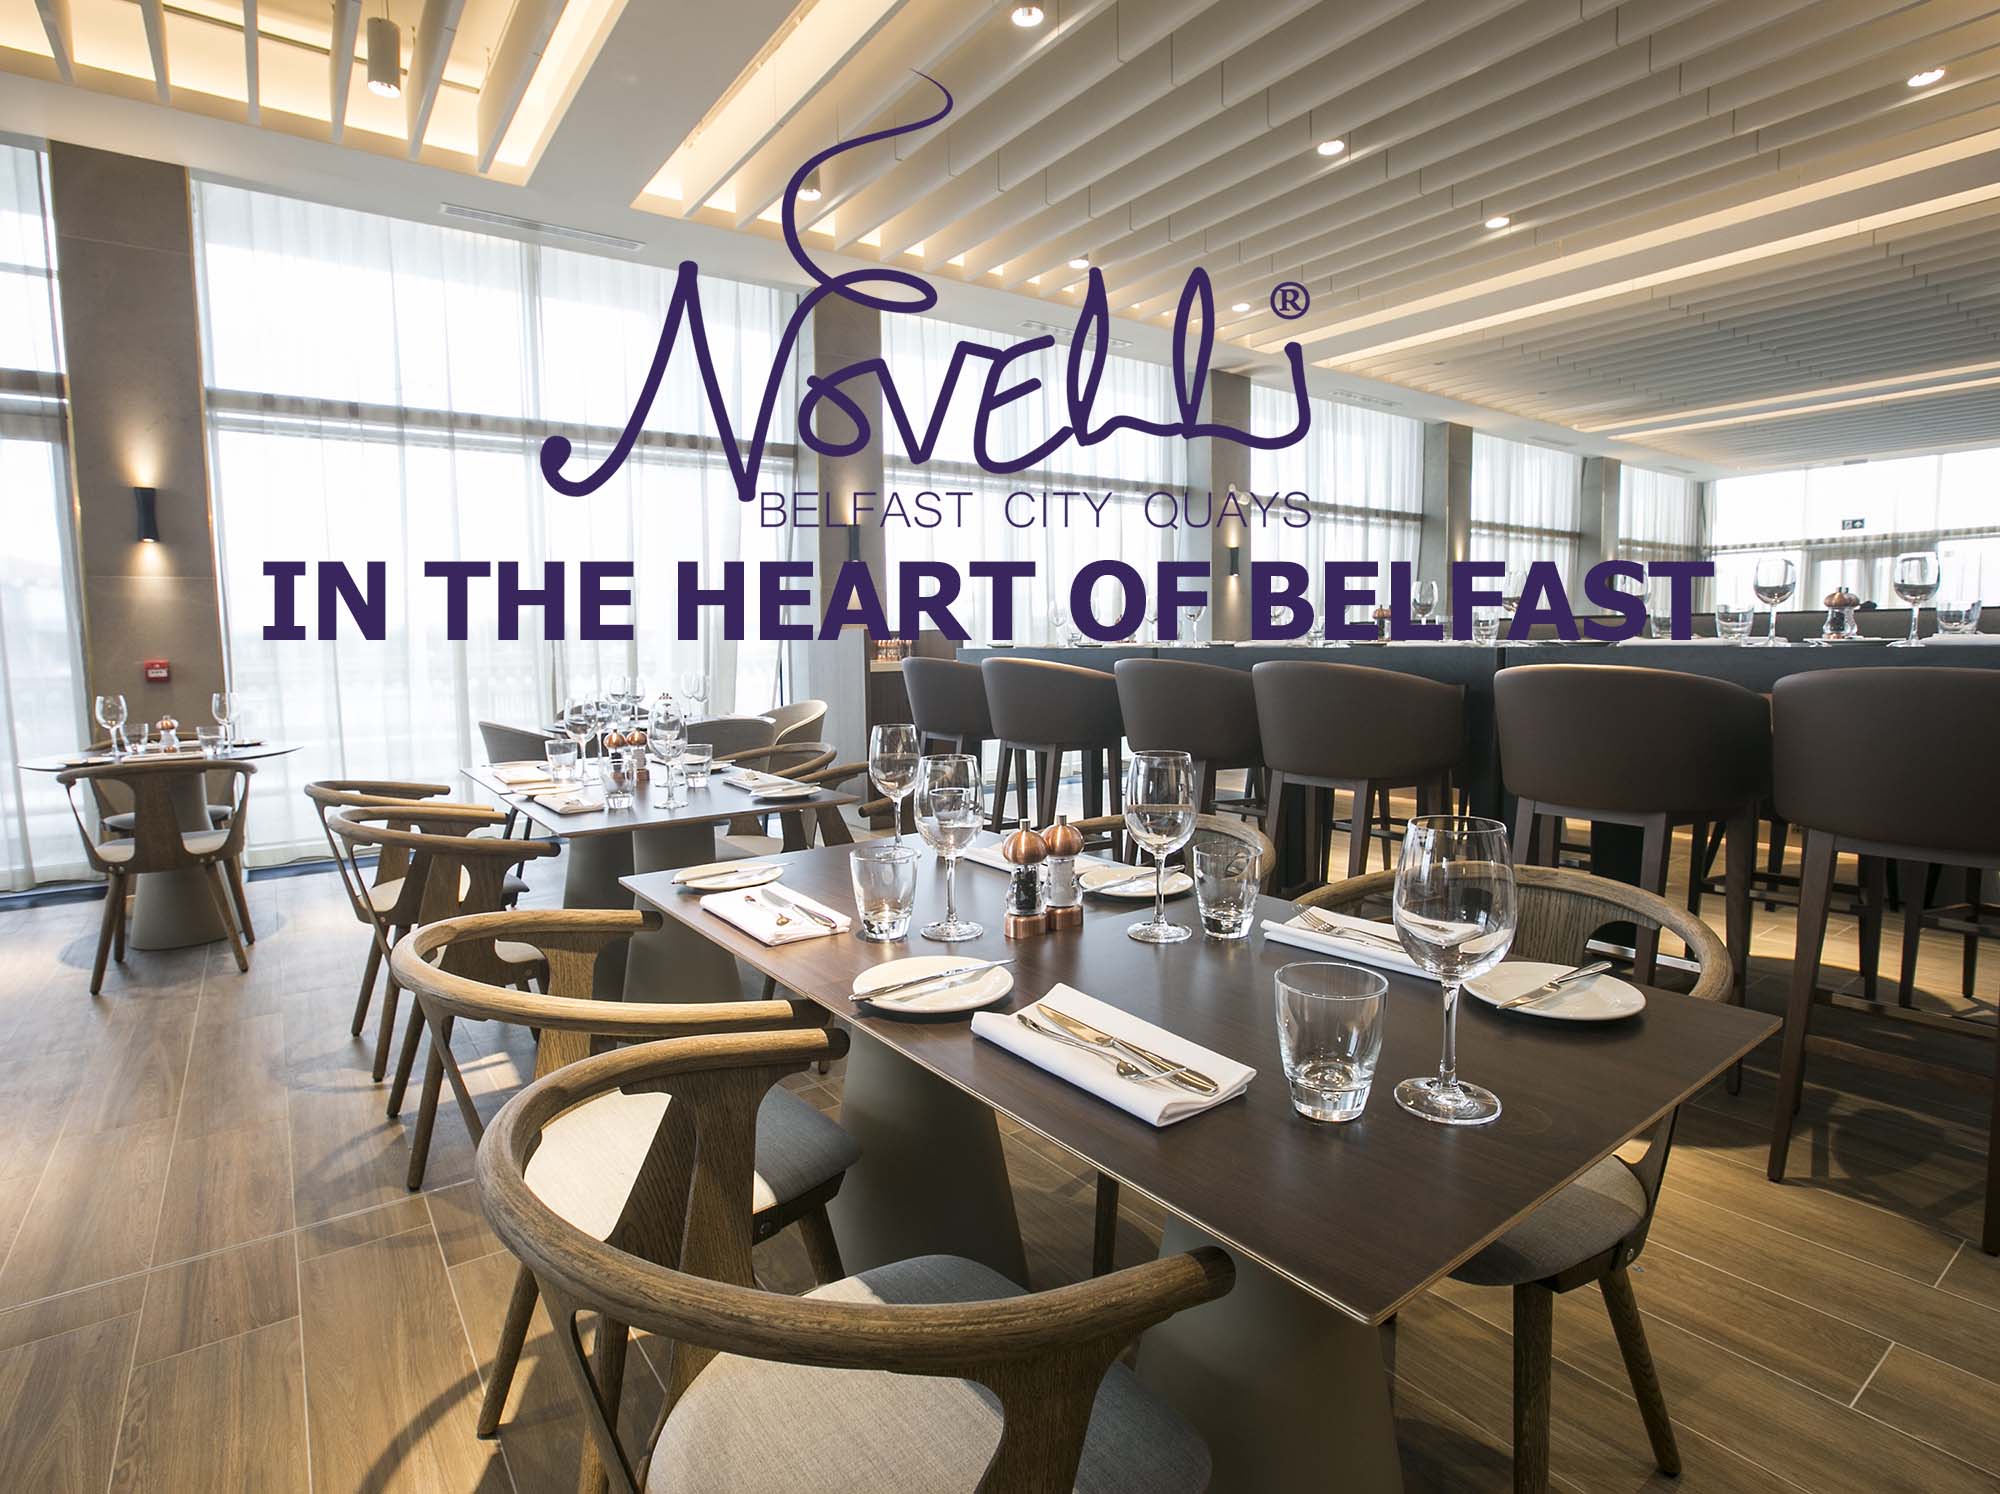 Novelli in the heart of Belfast tables with plates and glass utensils